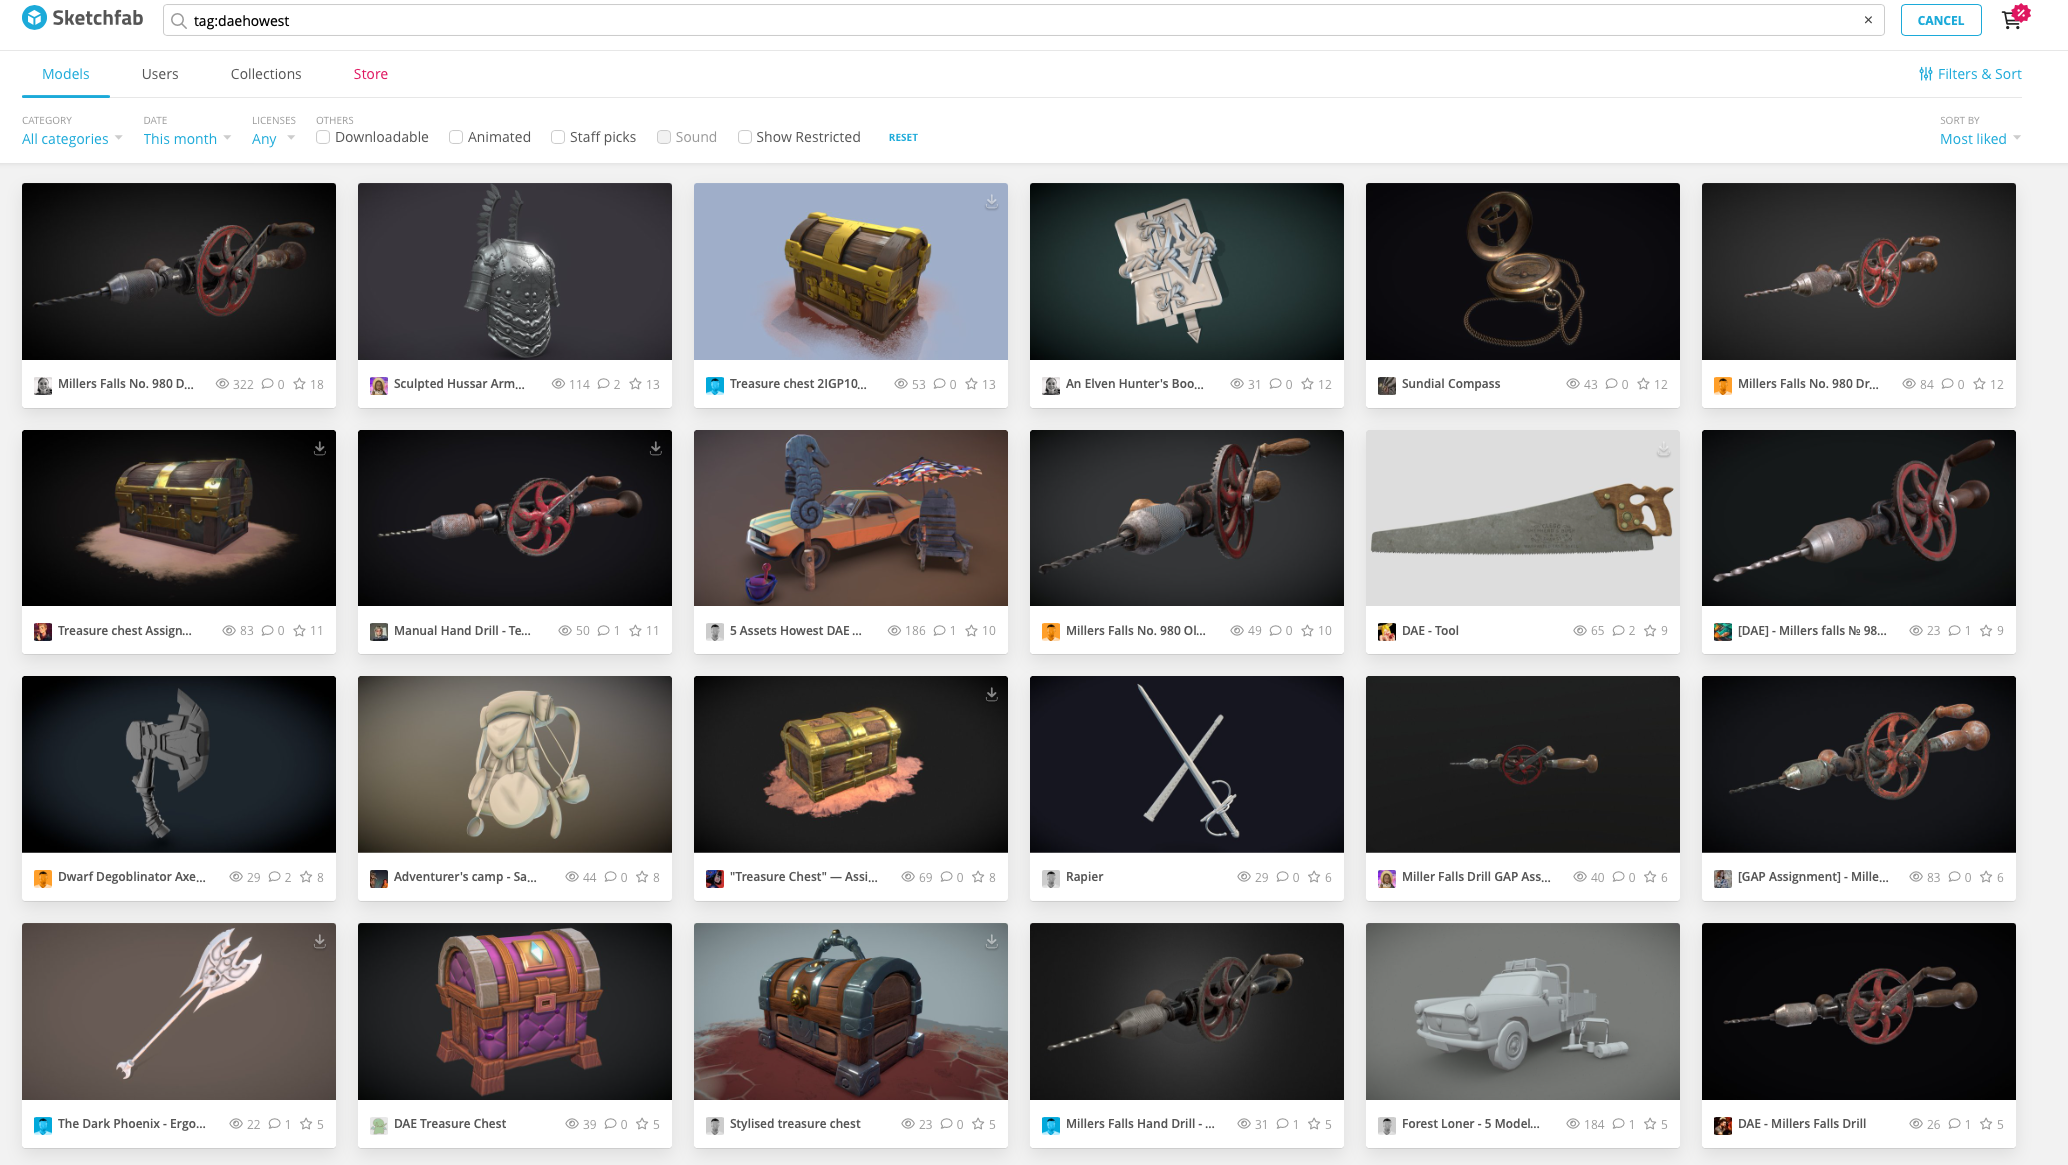 Game Jolt adds Sketchfab Integration, Allows Indie Game Developers to  Promote Their Work in 3D & VR - Sketchfab Community Blog - Sketchfab  Community Blog